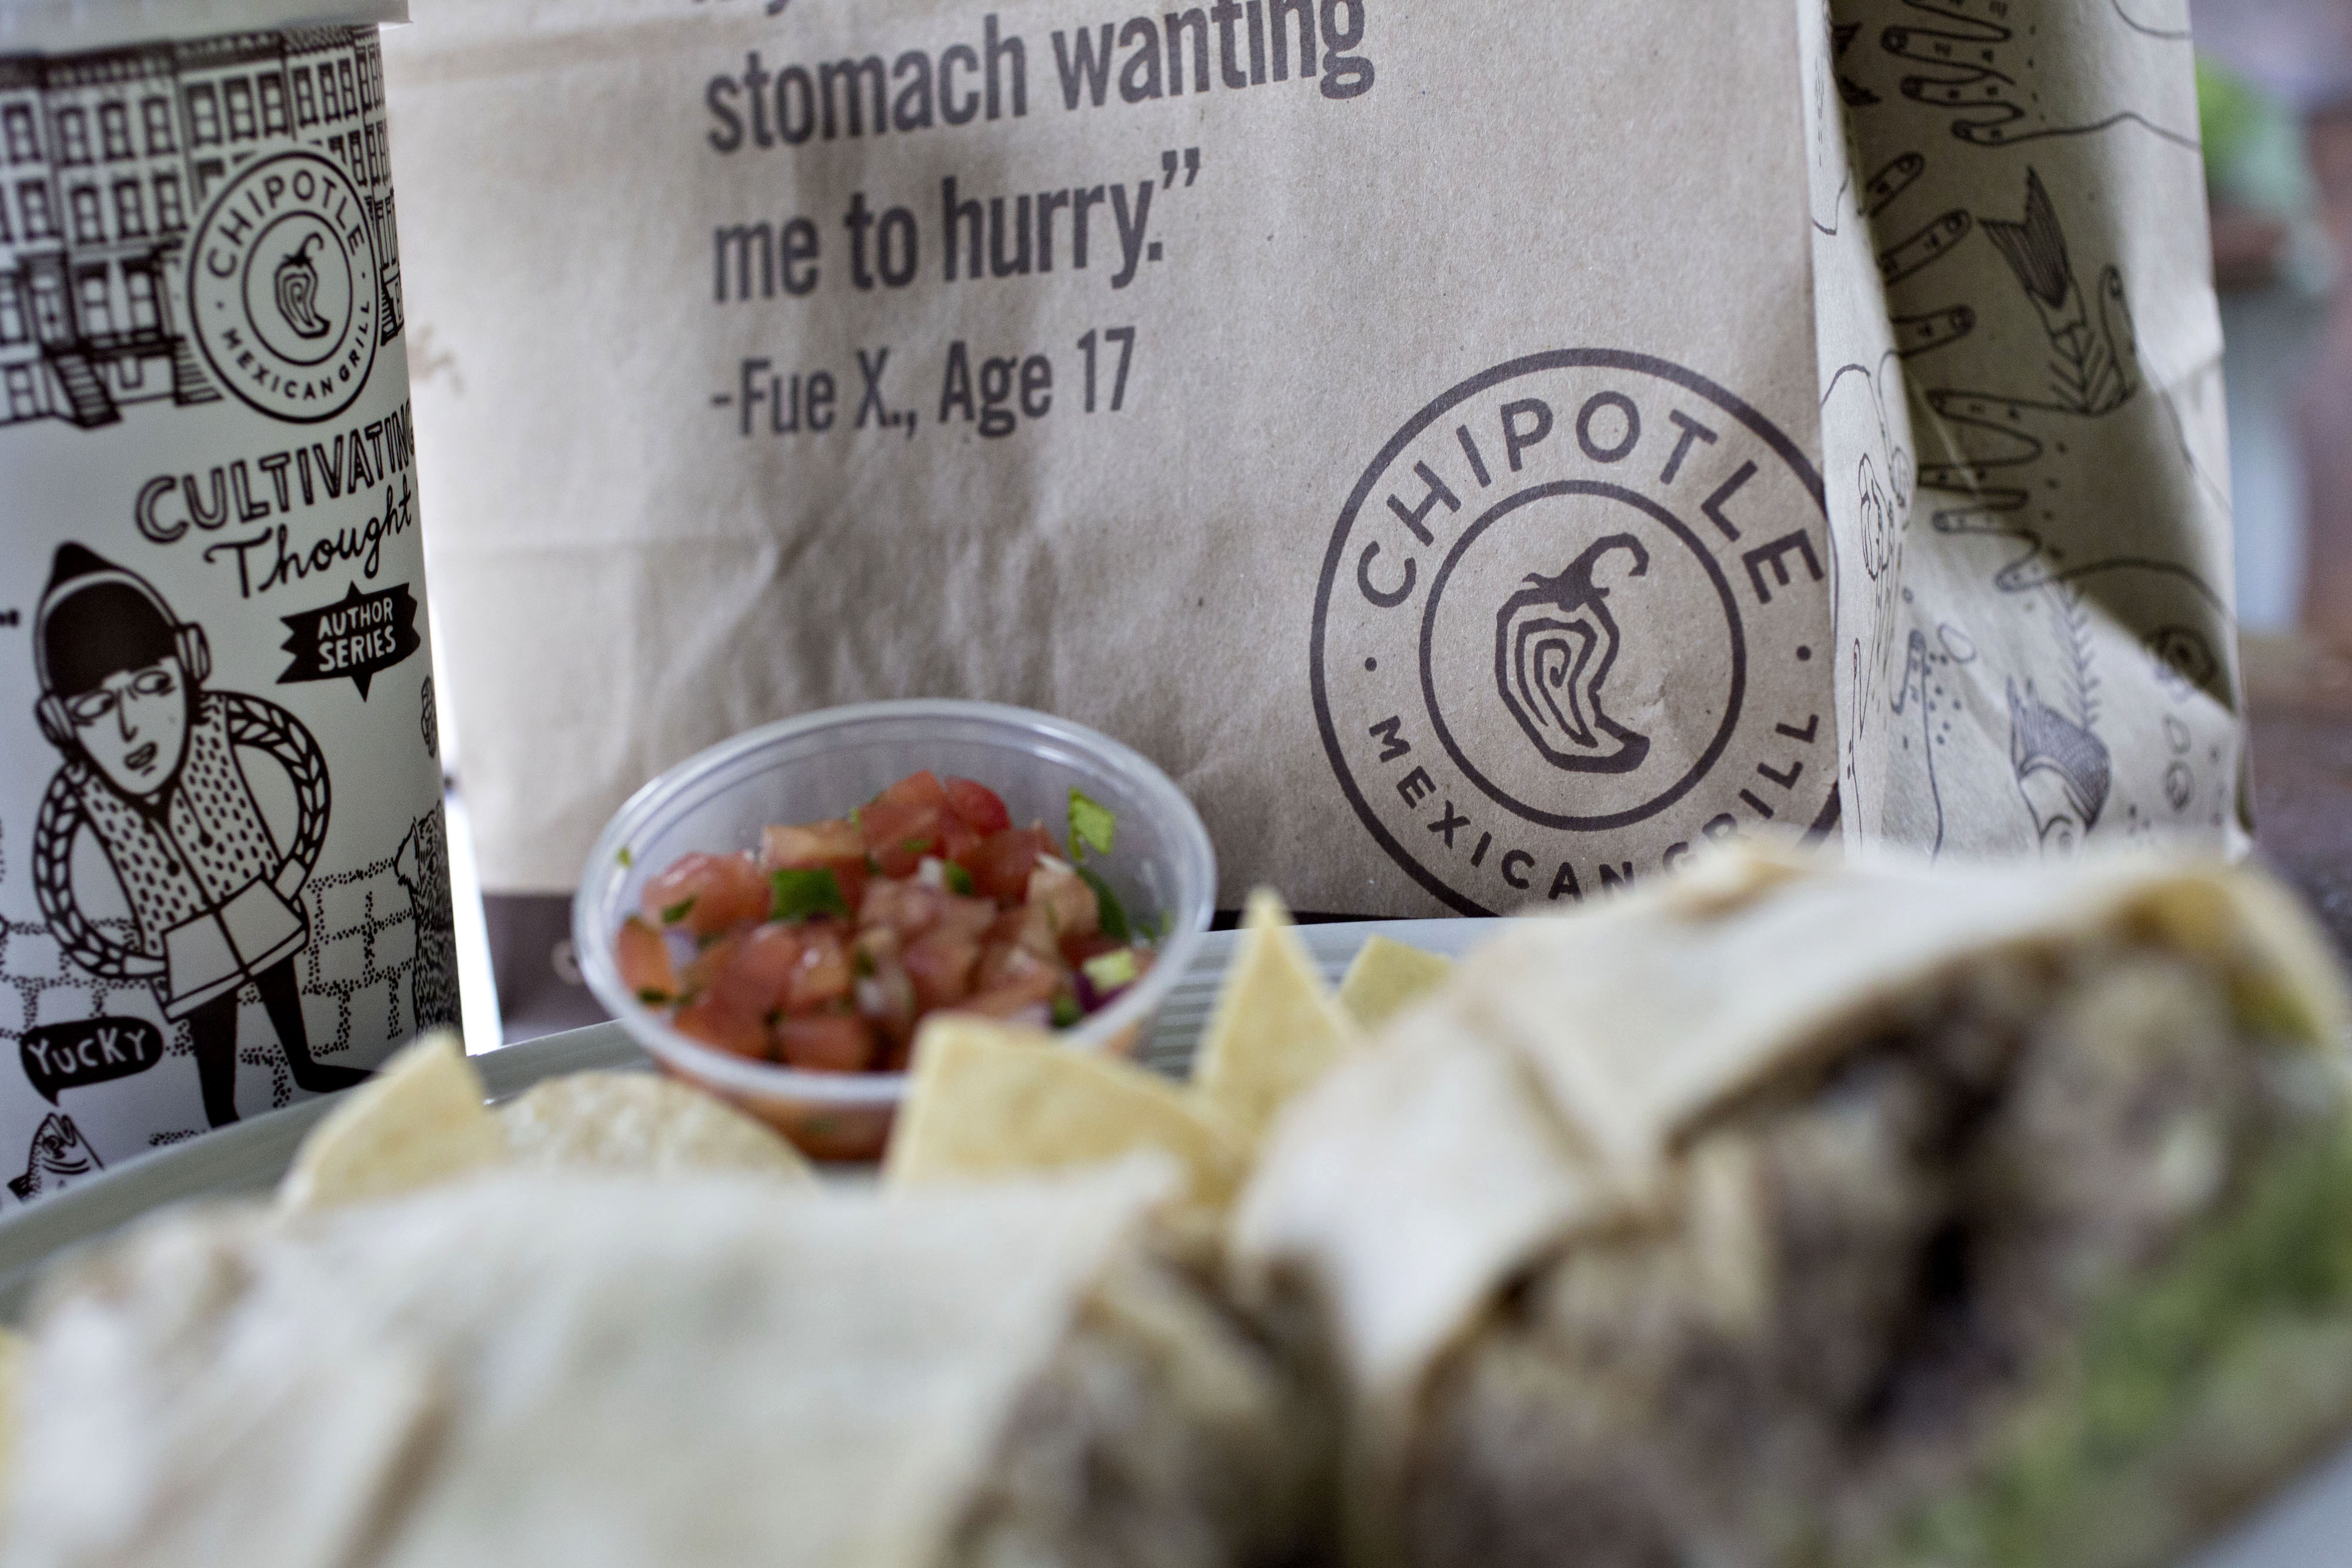 Chipotle Mexican Grill Inc. take-out food is arranged for a photograph in Tiskilwa, Illinois, U.S., on Friday, April 22, 2016. Chipotle Mexican Grill Inc. is expected to release earnings figures on April 26. Bloomberg&mdash;Bloomberg via Getty Images (Bloomberg&mdash;Bloomberg via Getty Images)